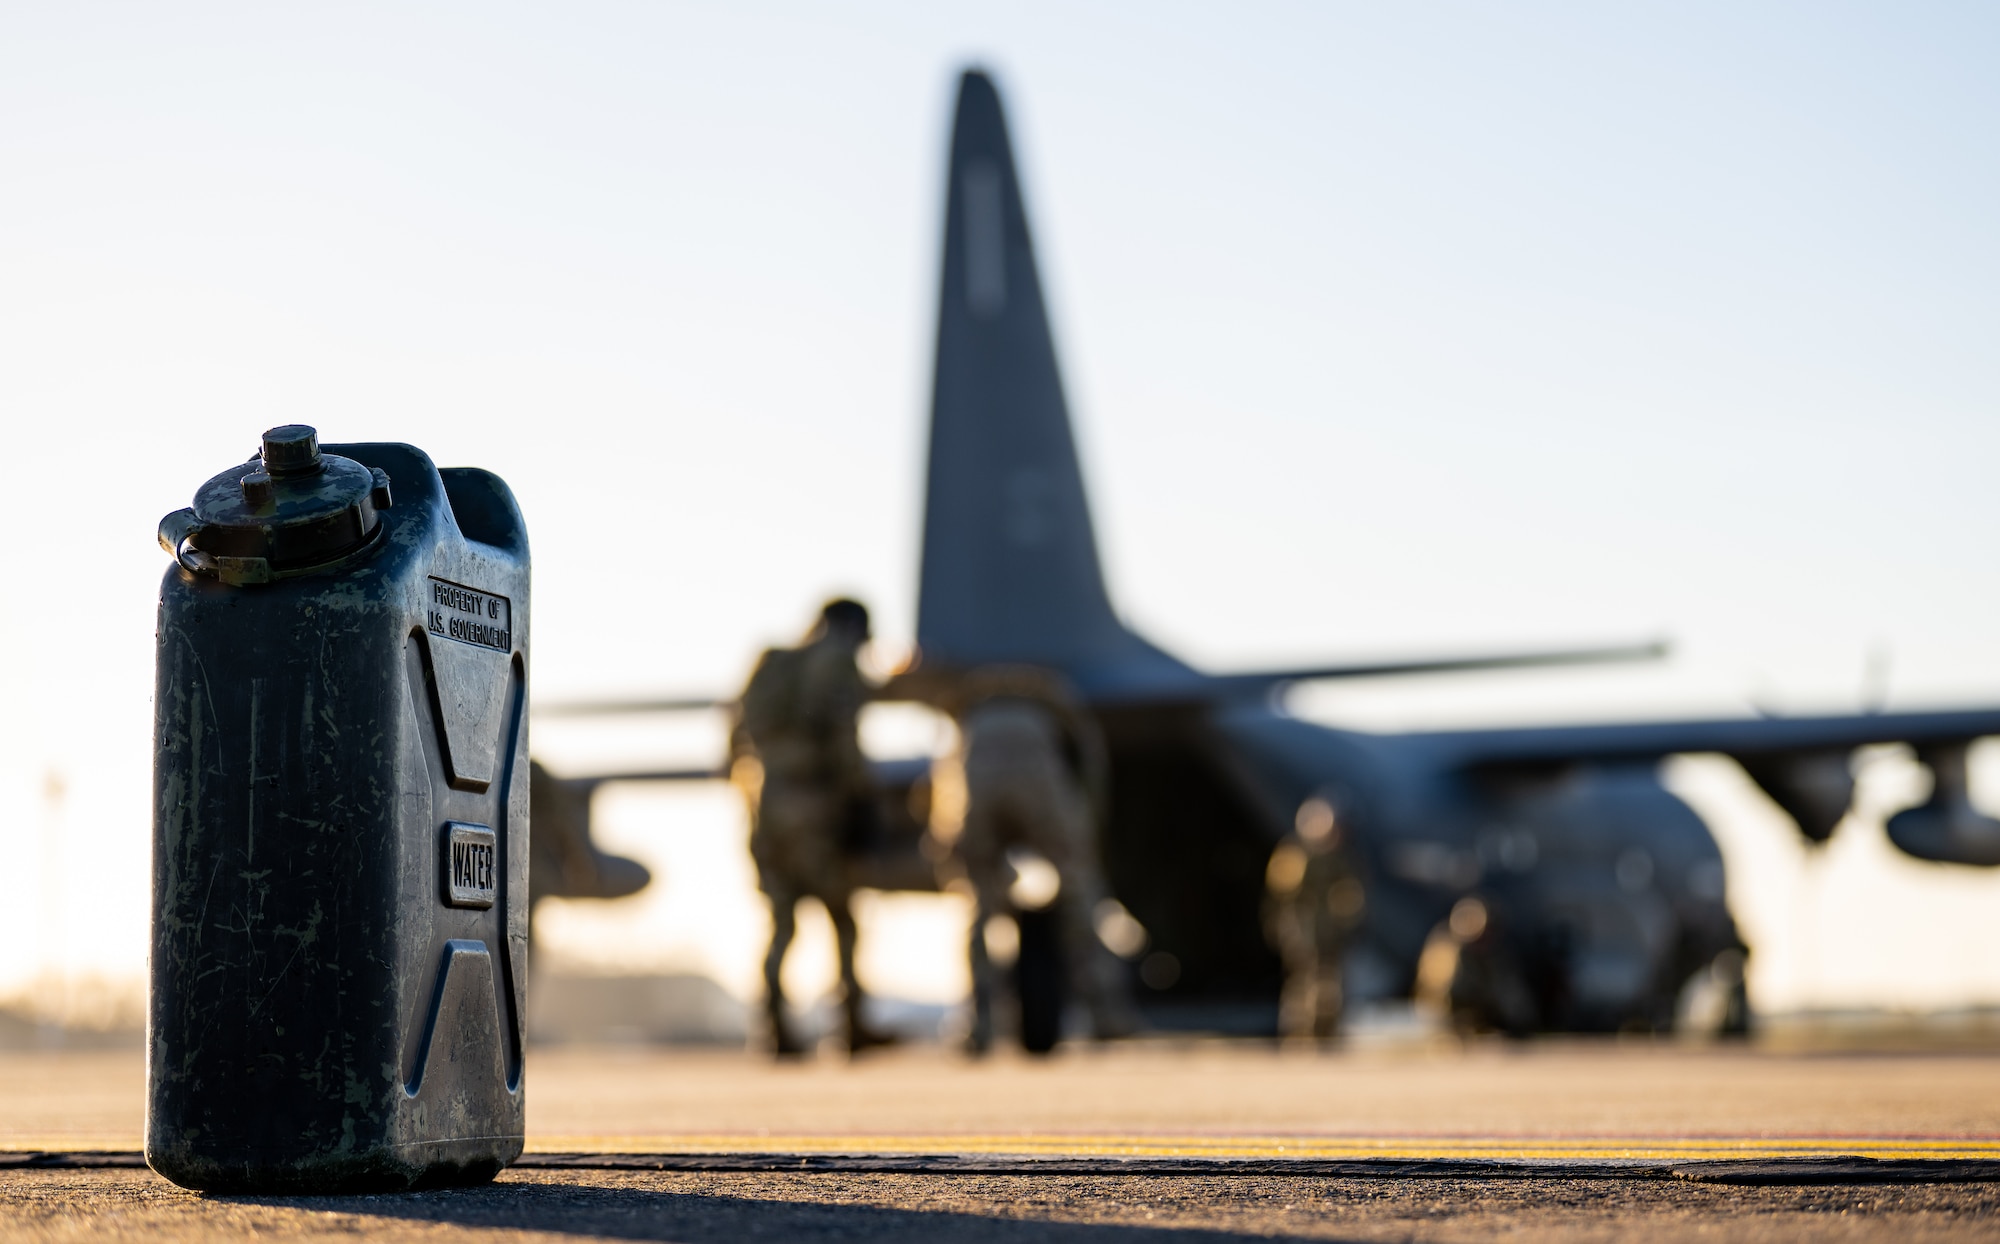 Airmen from the 100th Air Refueling Wing and the 352nd Special Operations Wing work together to pack up their gear after completing forward area refueling point (FARP) training at Royal Air Force Mildenhall, England, Feb. 6, 2023. FARP capabilities enable the 100th ARW and the 352nd SOW to partner together and provide critical on-the-ground refueling to NATO allies and European partners in austere locations with a minimal footprint. (U.S. Air Force photo by Staff Sgt. Kevin Long)